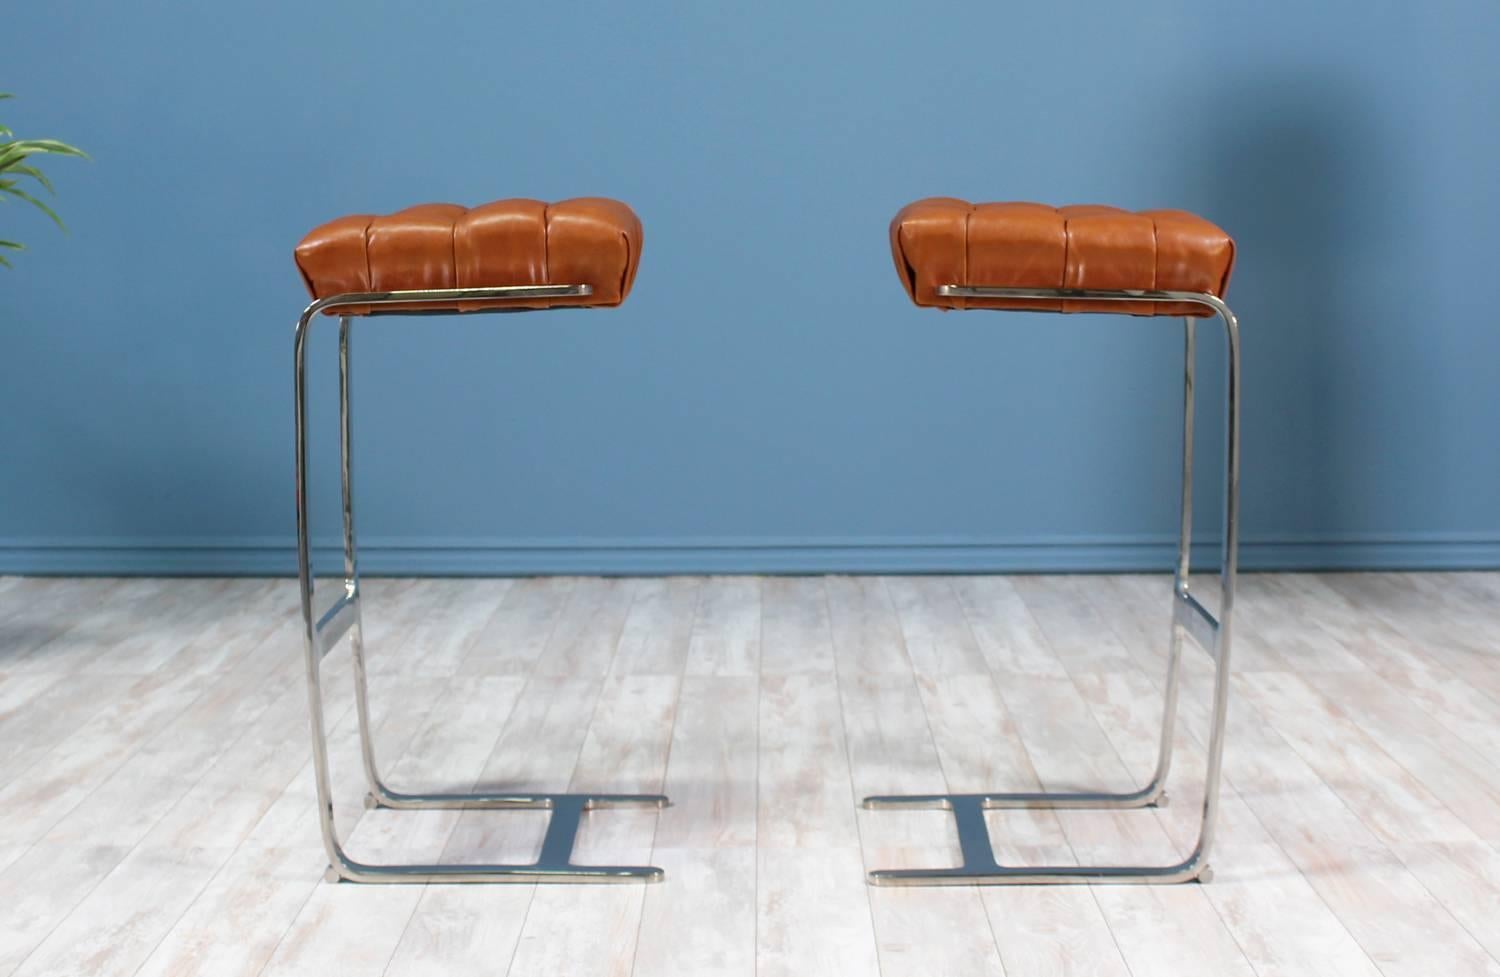 American Mies van der Rohe Steel and Leather Tufted Bar Stools for Knoll